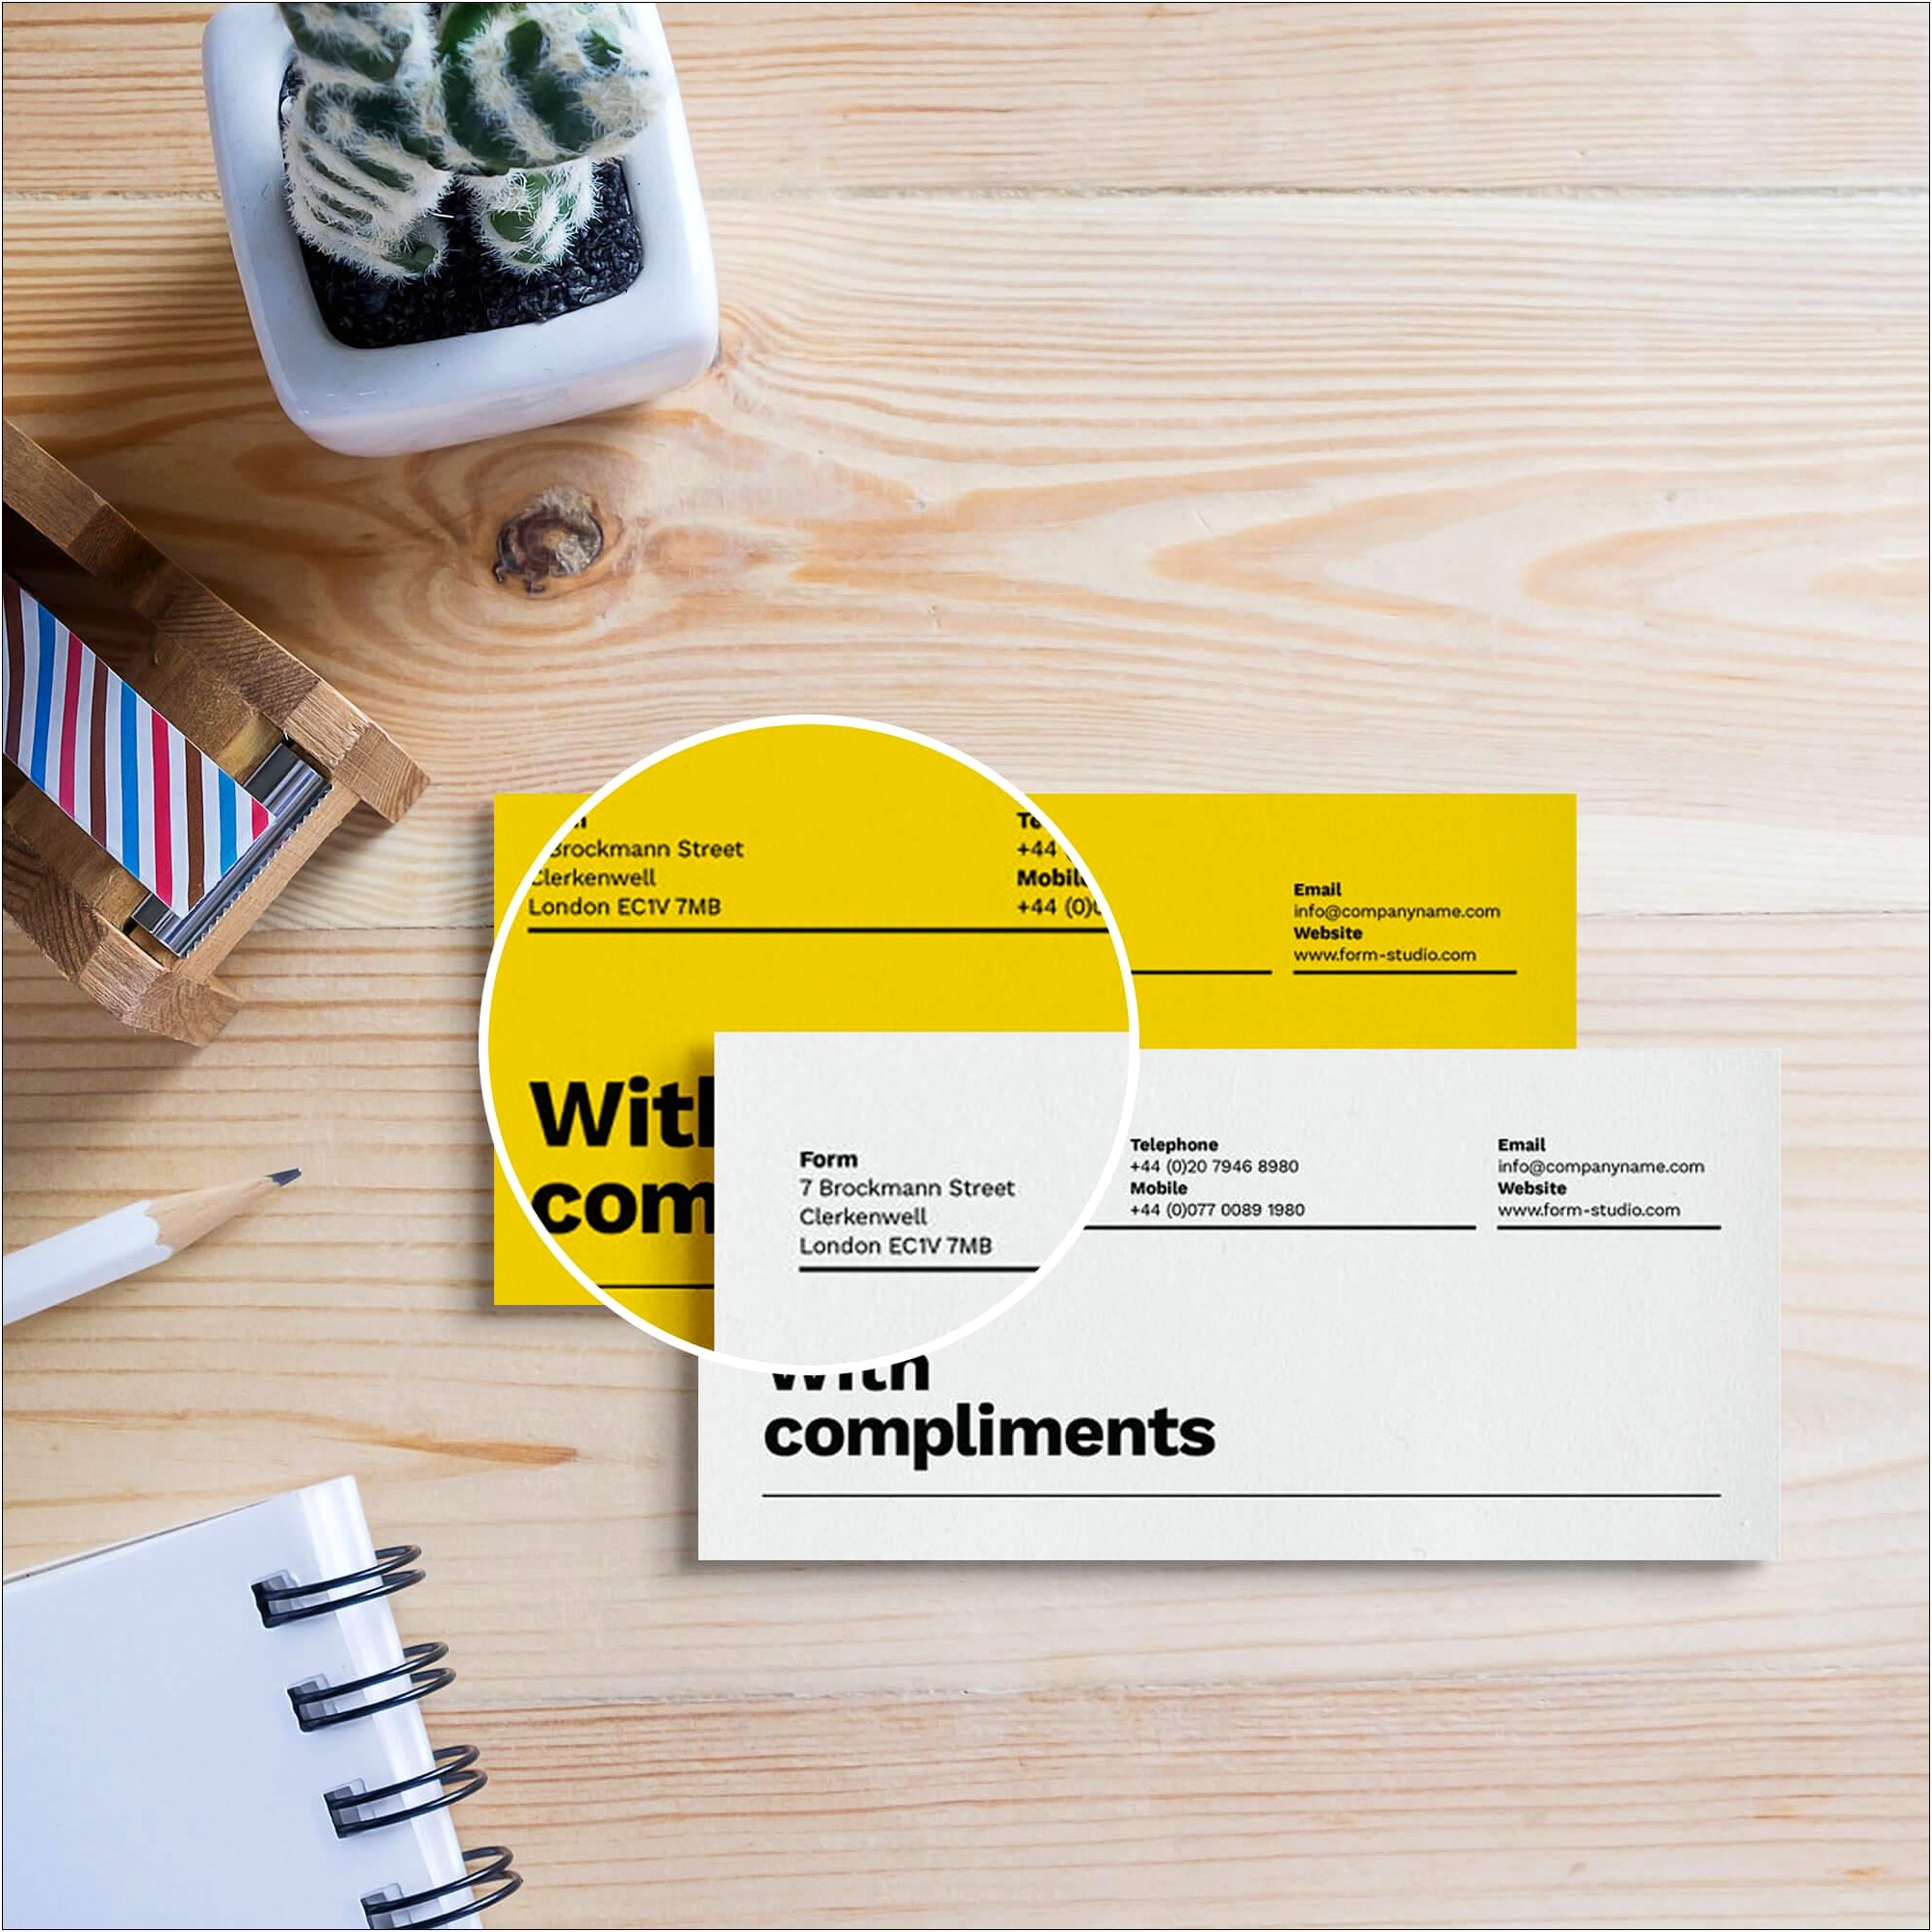 With Compliments Slip Template Free Download